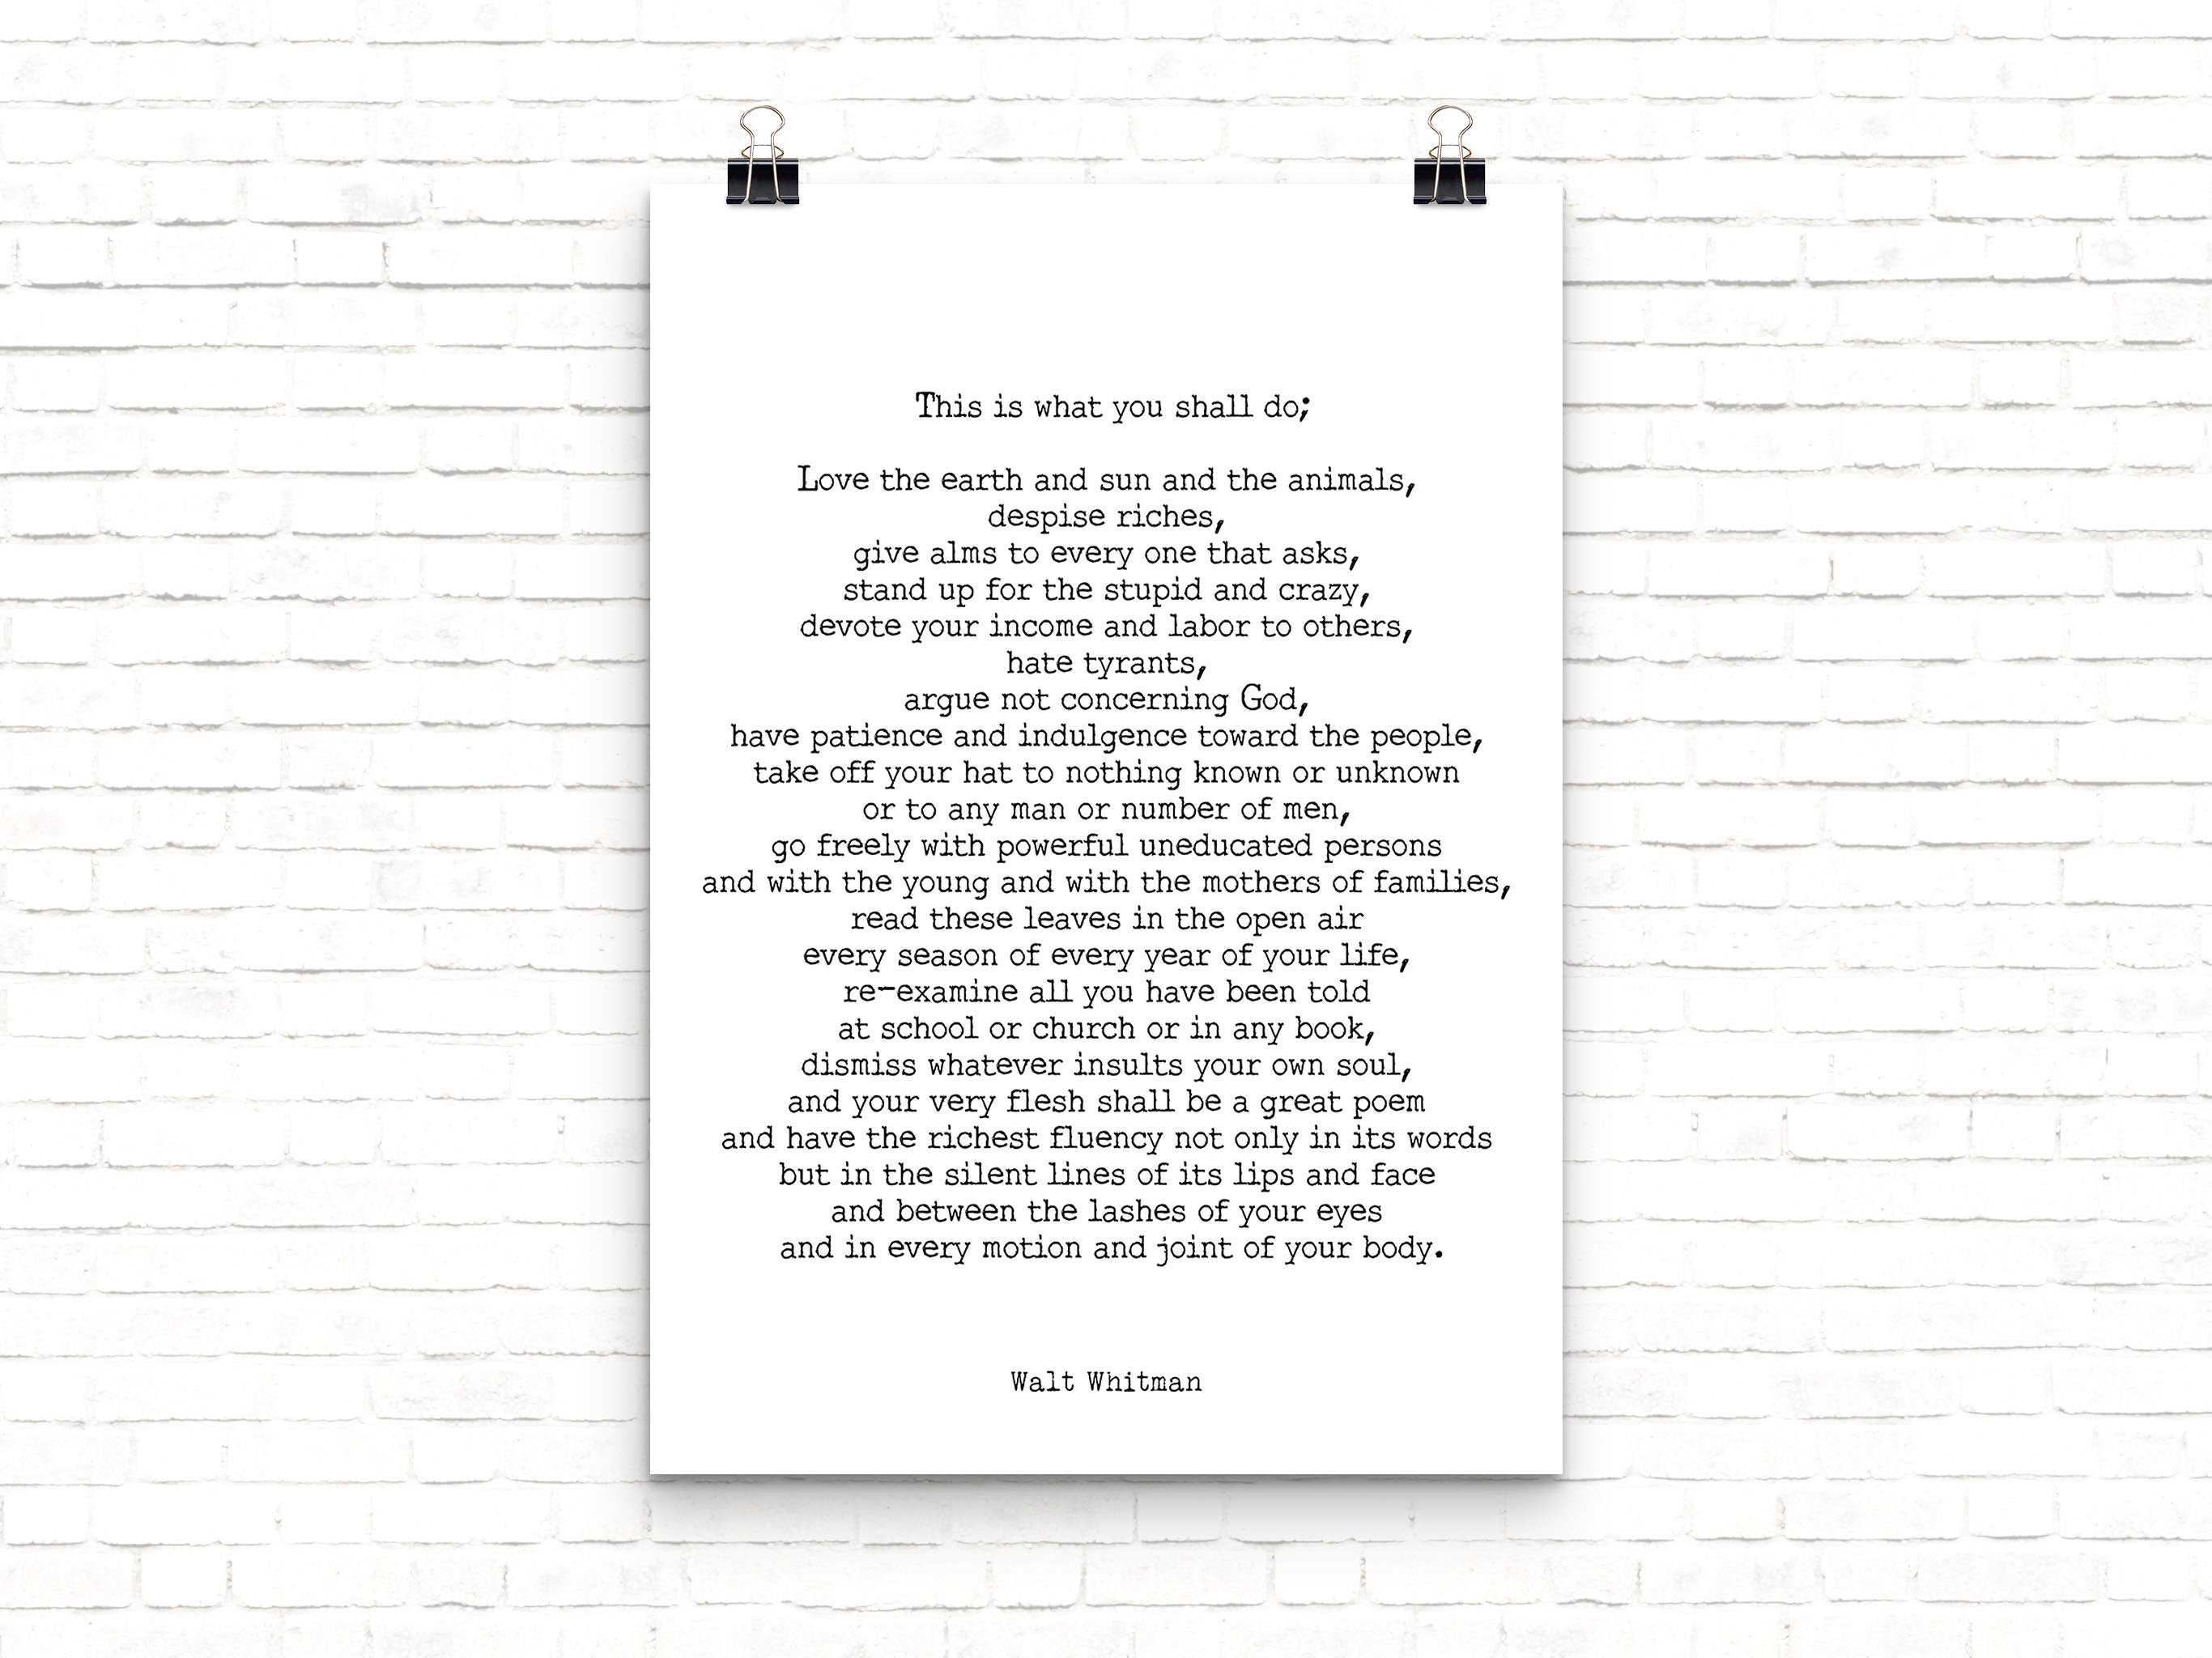 Walt Whitman Leaves of Grass Print, This Is What You Shall Do Inspirational Poem in Black & White for Home Wall Decor, Unframed - BookQuoteDecor